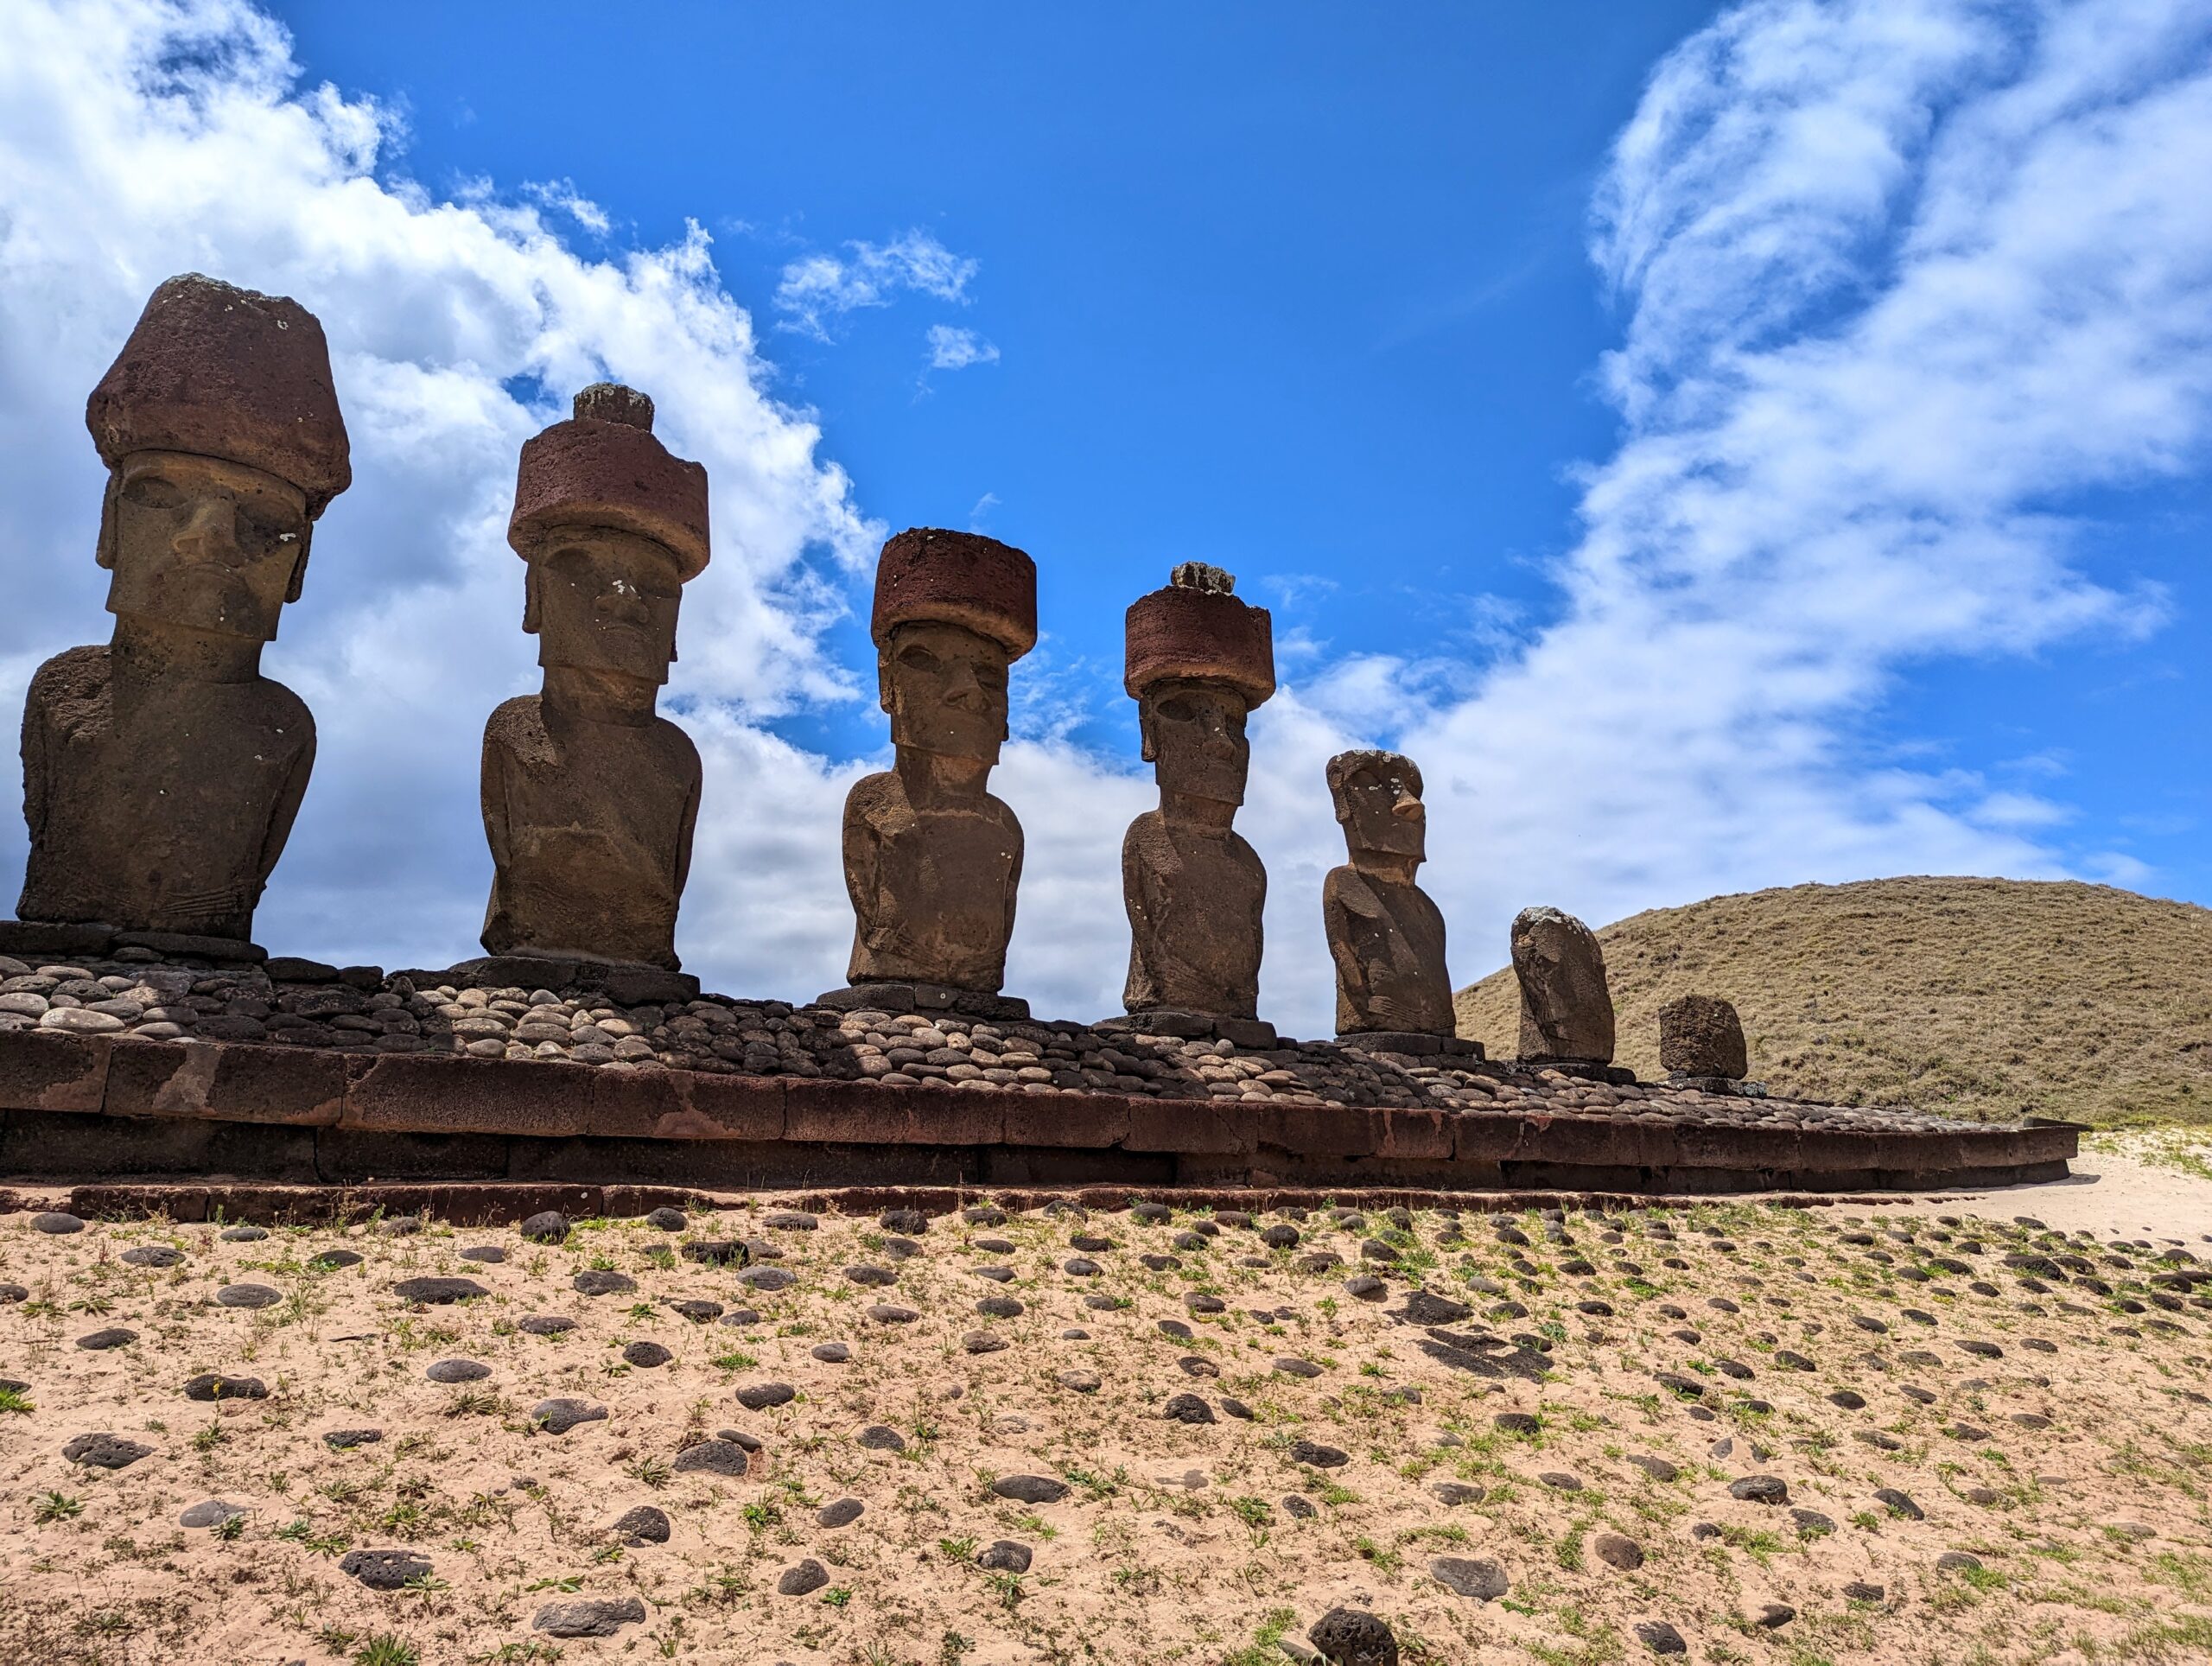 An up close shot of the Moai statues against bright blue skies.